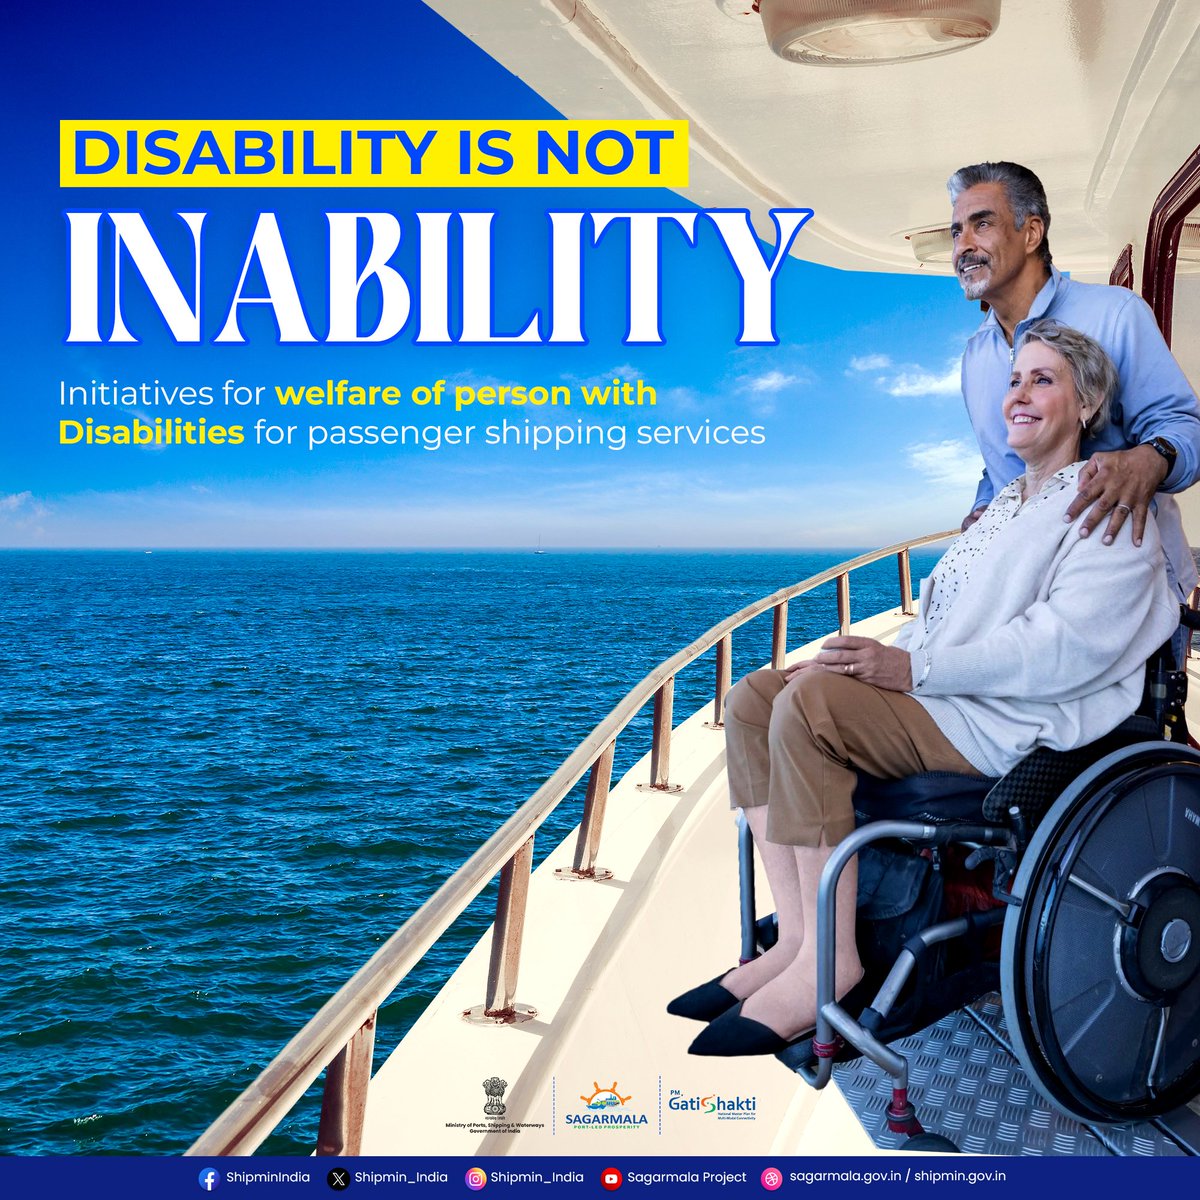 MoPSW feels proud to inform that Standards of Accessibility for person with Disabilities, Divyangjan, for passenger shipping services DGS Order is formulated & issued. This will enable @socialpwds persons to have special facilitates in passenger shipping services in India.